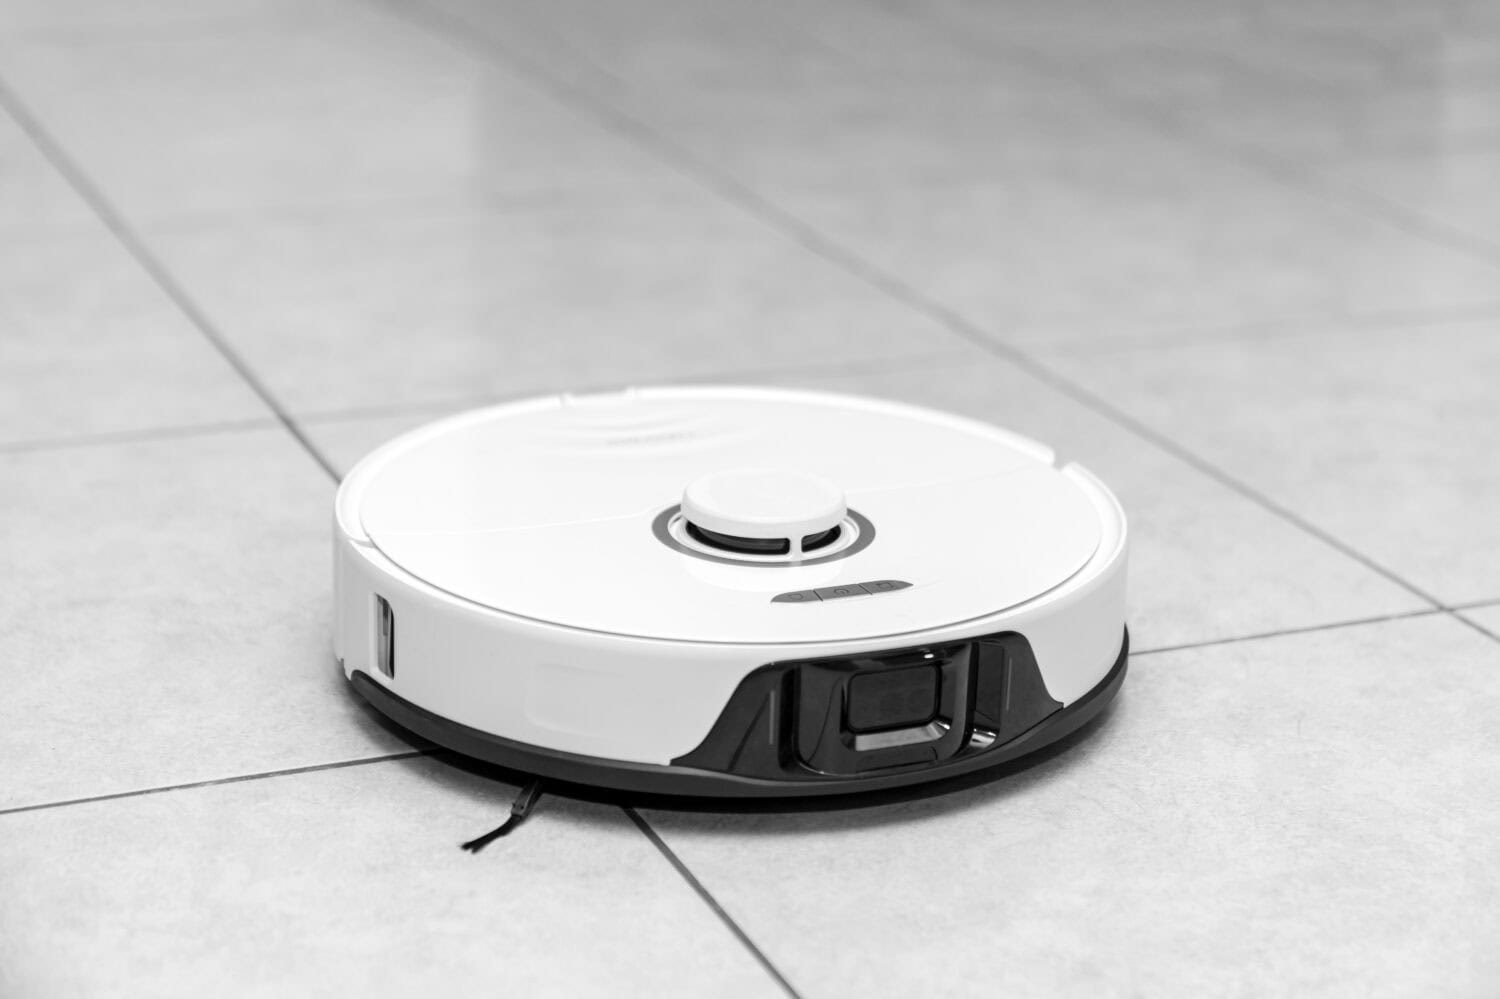 robot vacuum cleaner in modern smart home, robotic vacuum cleaner on tiles floor, Robot vacuum cleaner cleaning dust on tile floors. Modern smart cleaning technology housekeeping.	